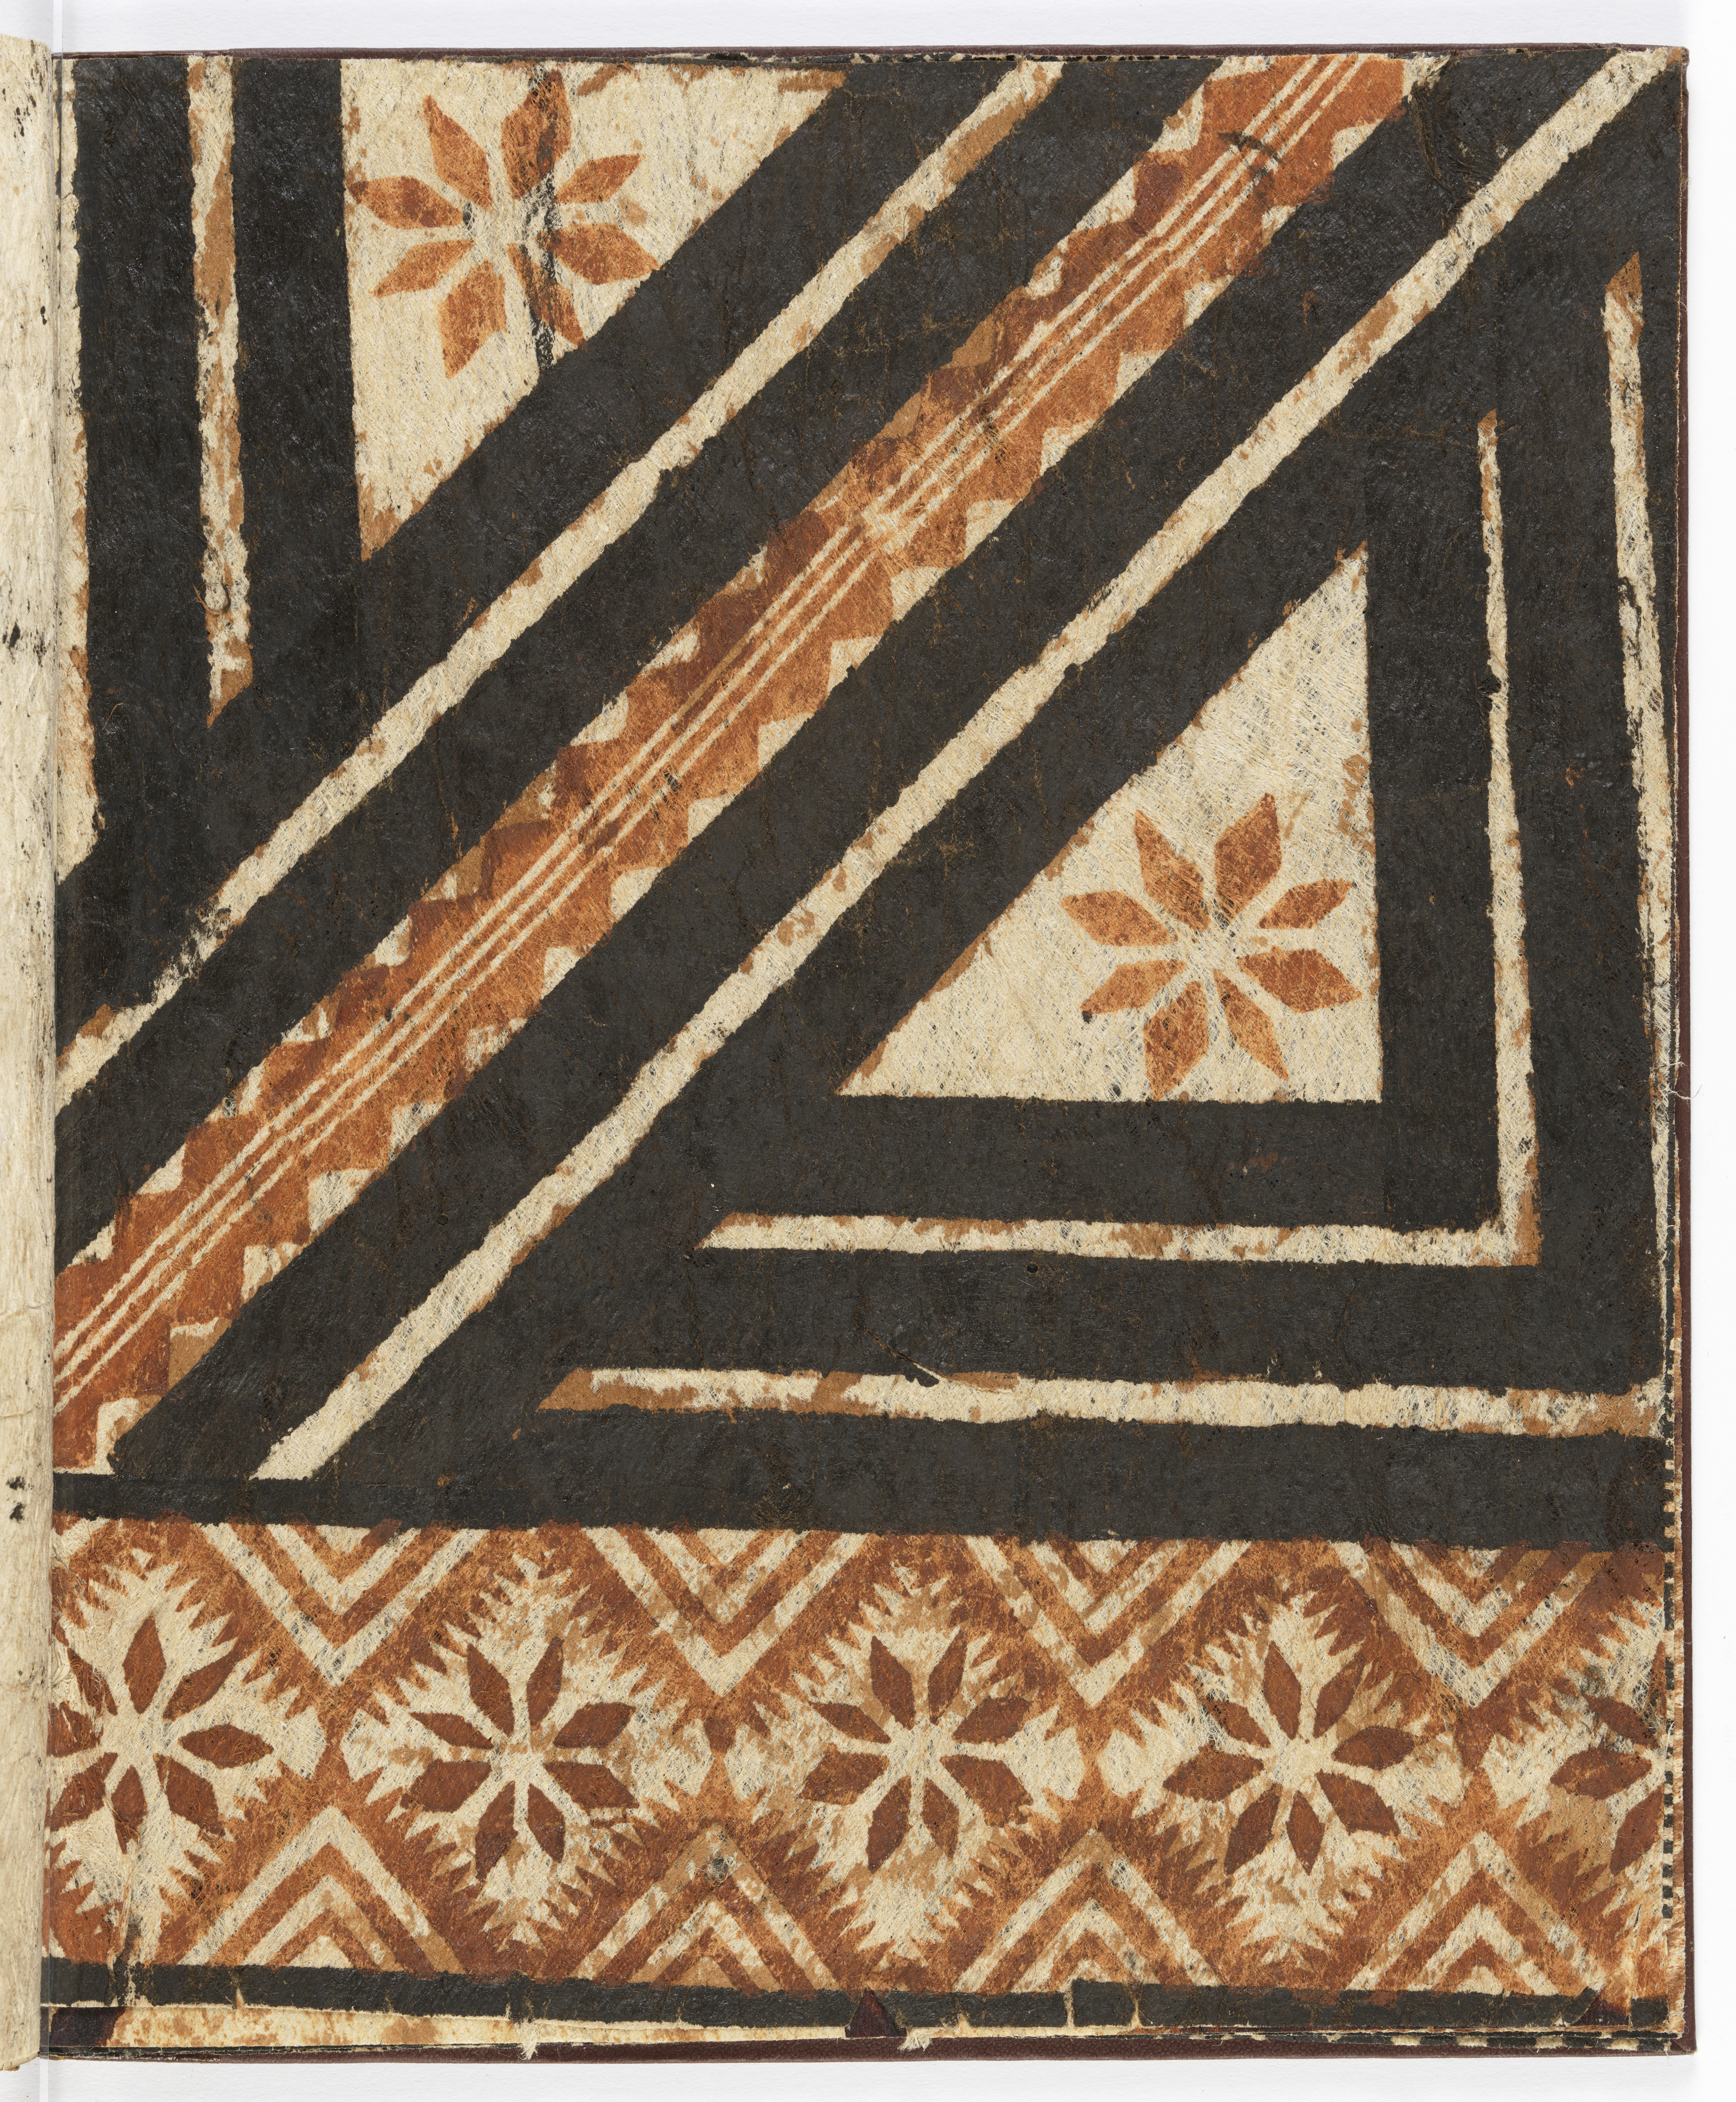 Detail from Specimens of Native Paper from Tongo [Tonga] and Fiji, sent home by John Hunt, Wesleyan missionary, 1847